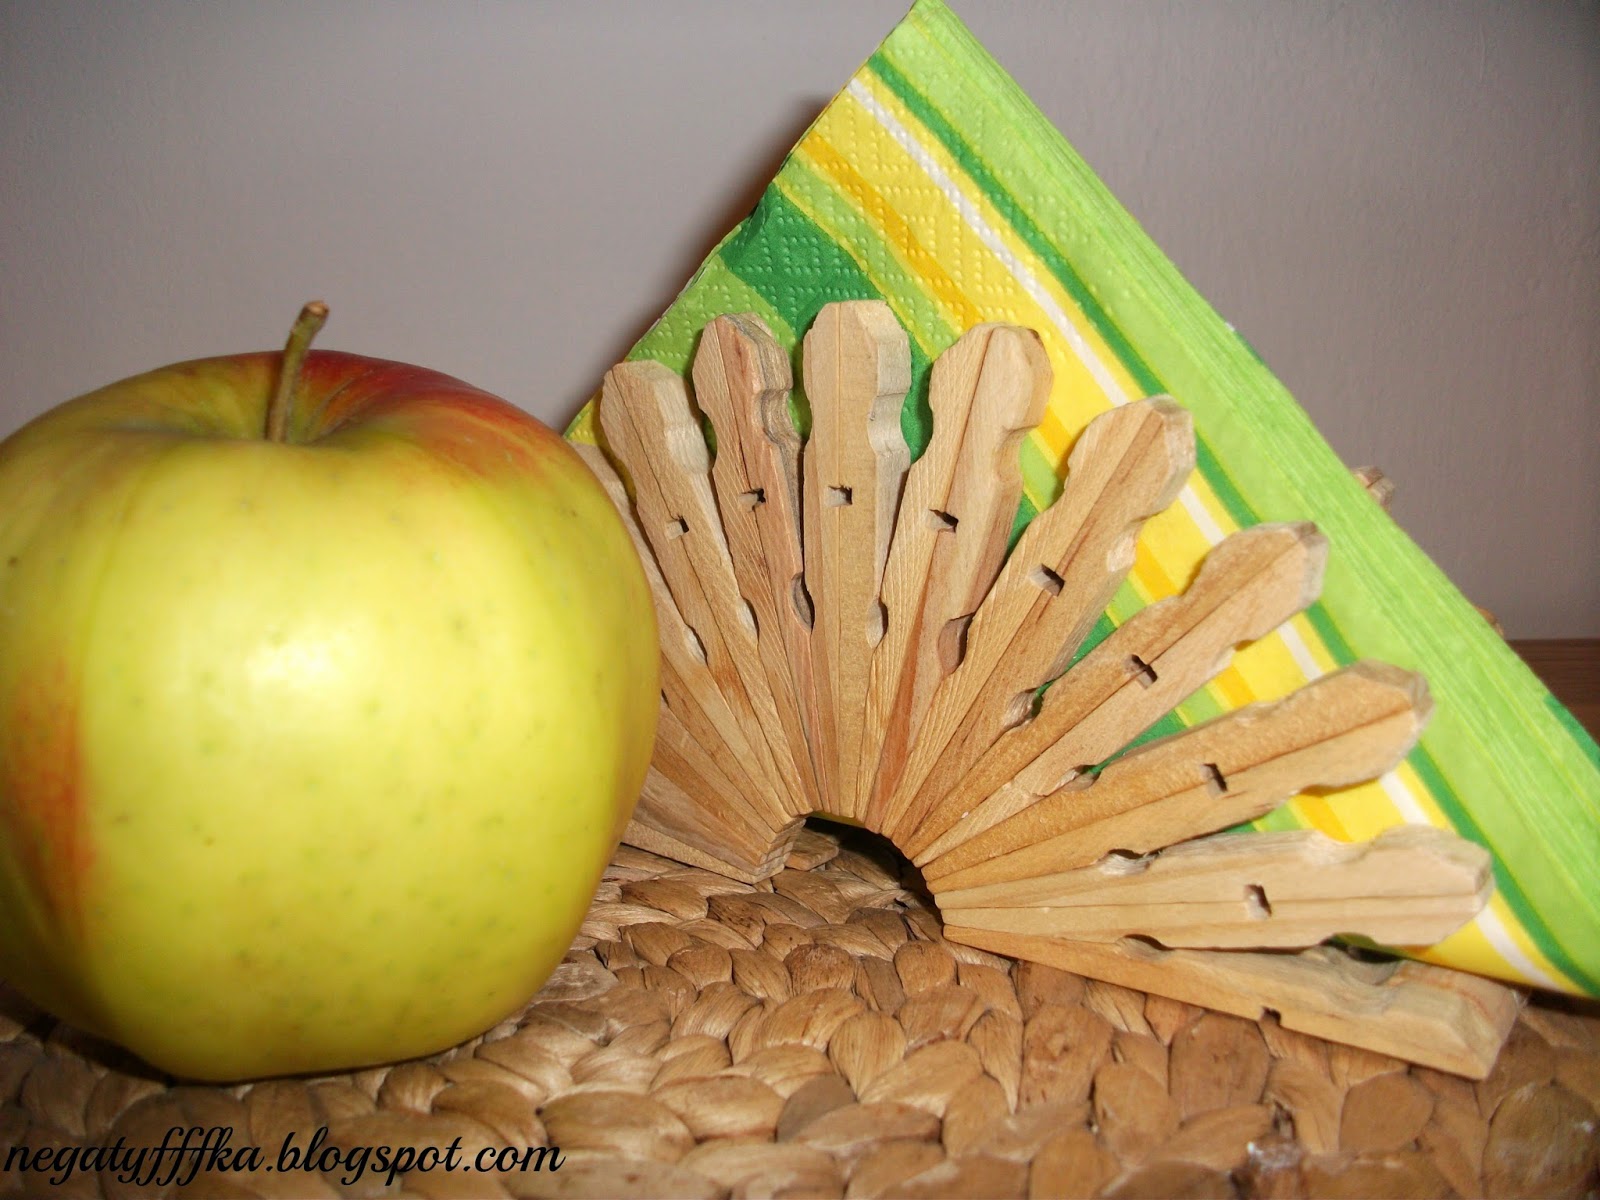 How-to-Make-a-Unique-Napkin-Holder-from-Clothespins-7.jpg